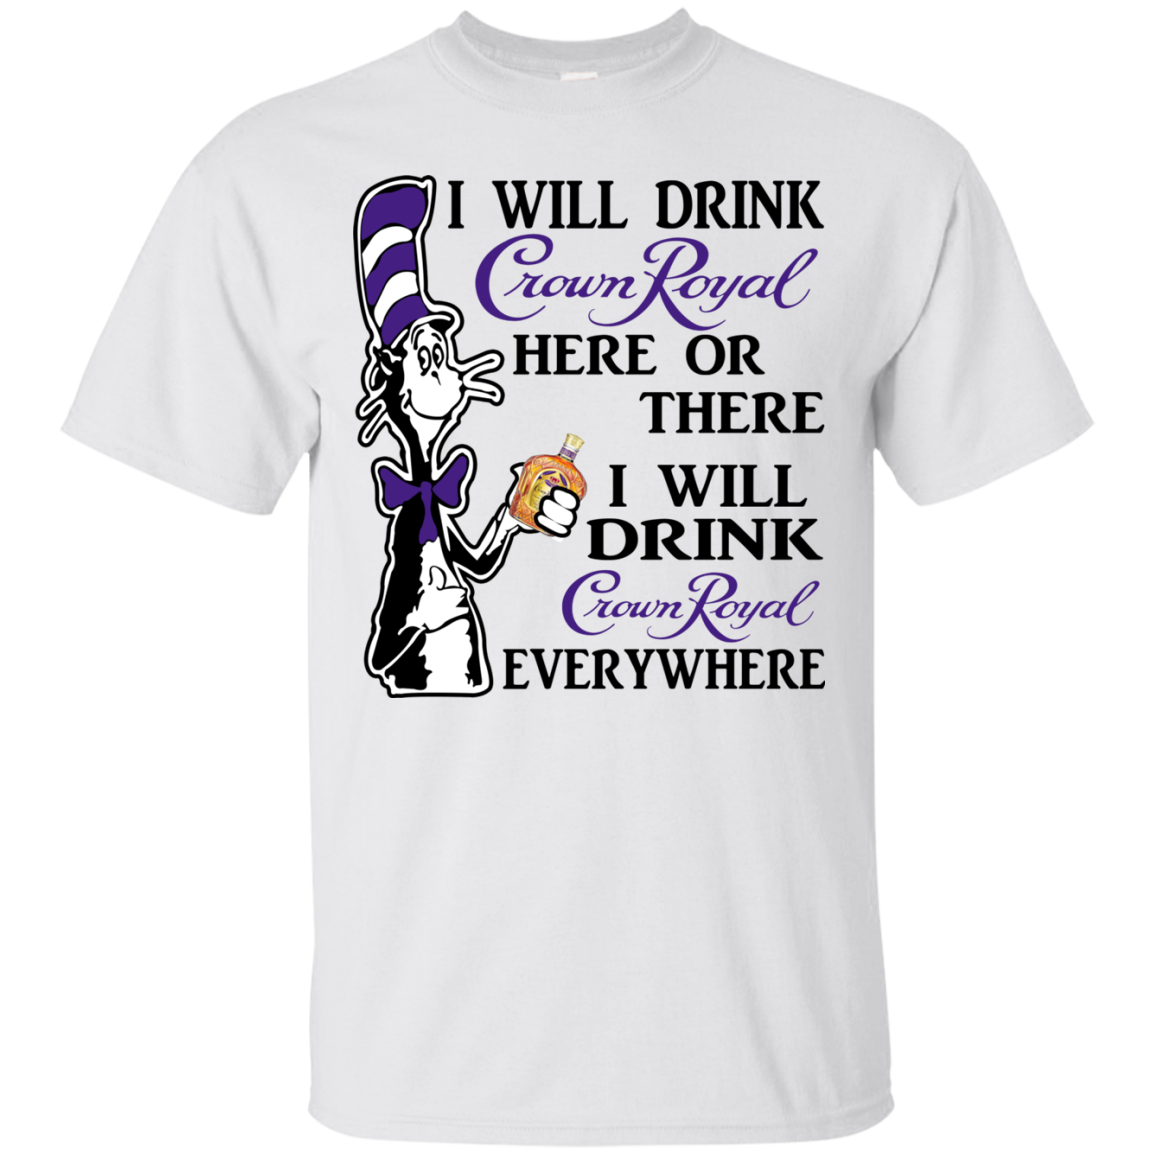 Download Dr Seuss I Will Drink Crown Royal Here Or There Shirt, Hoodie